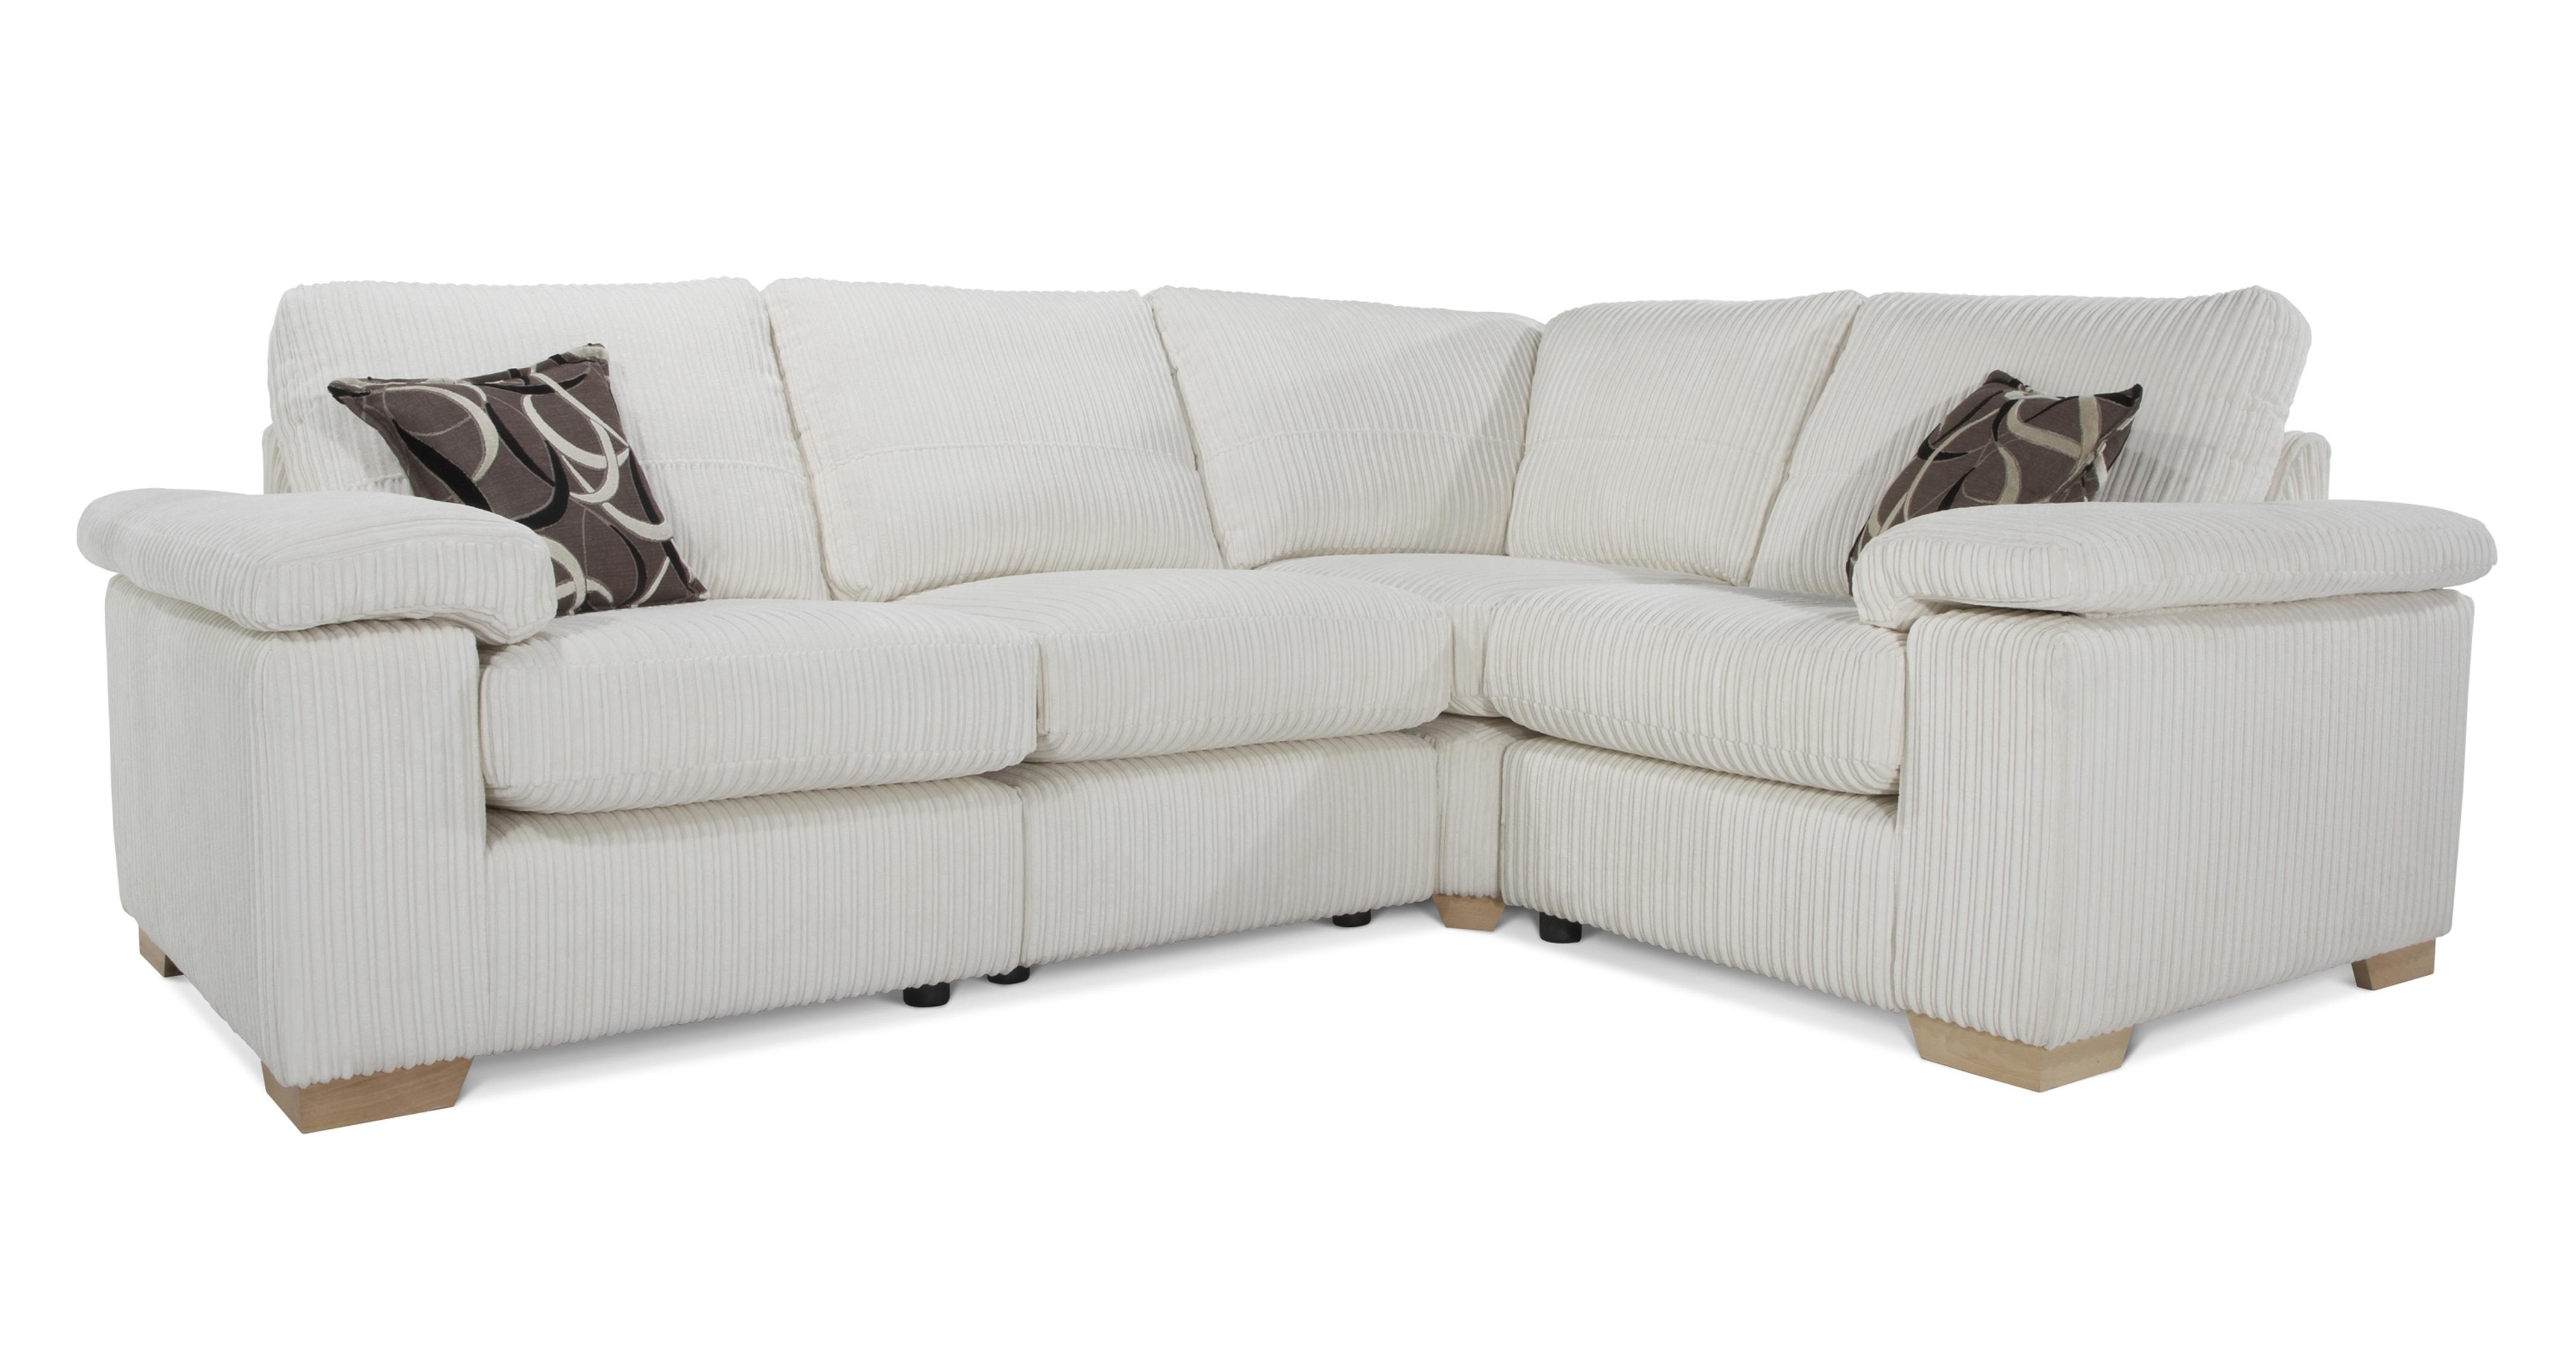 DFS Riva Set - Fabric Corner Sofa Bed Including Chair and Foot Stool ...